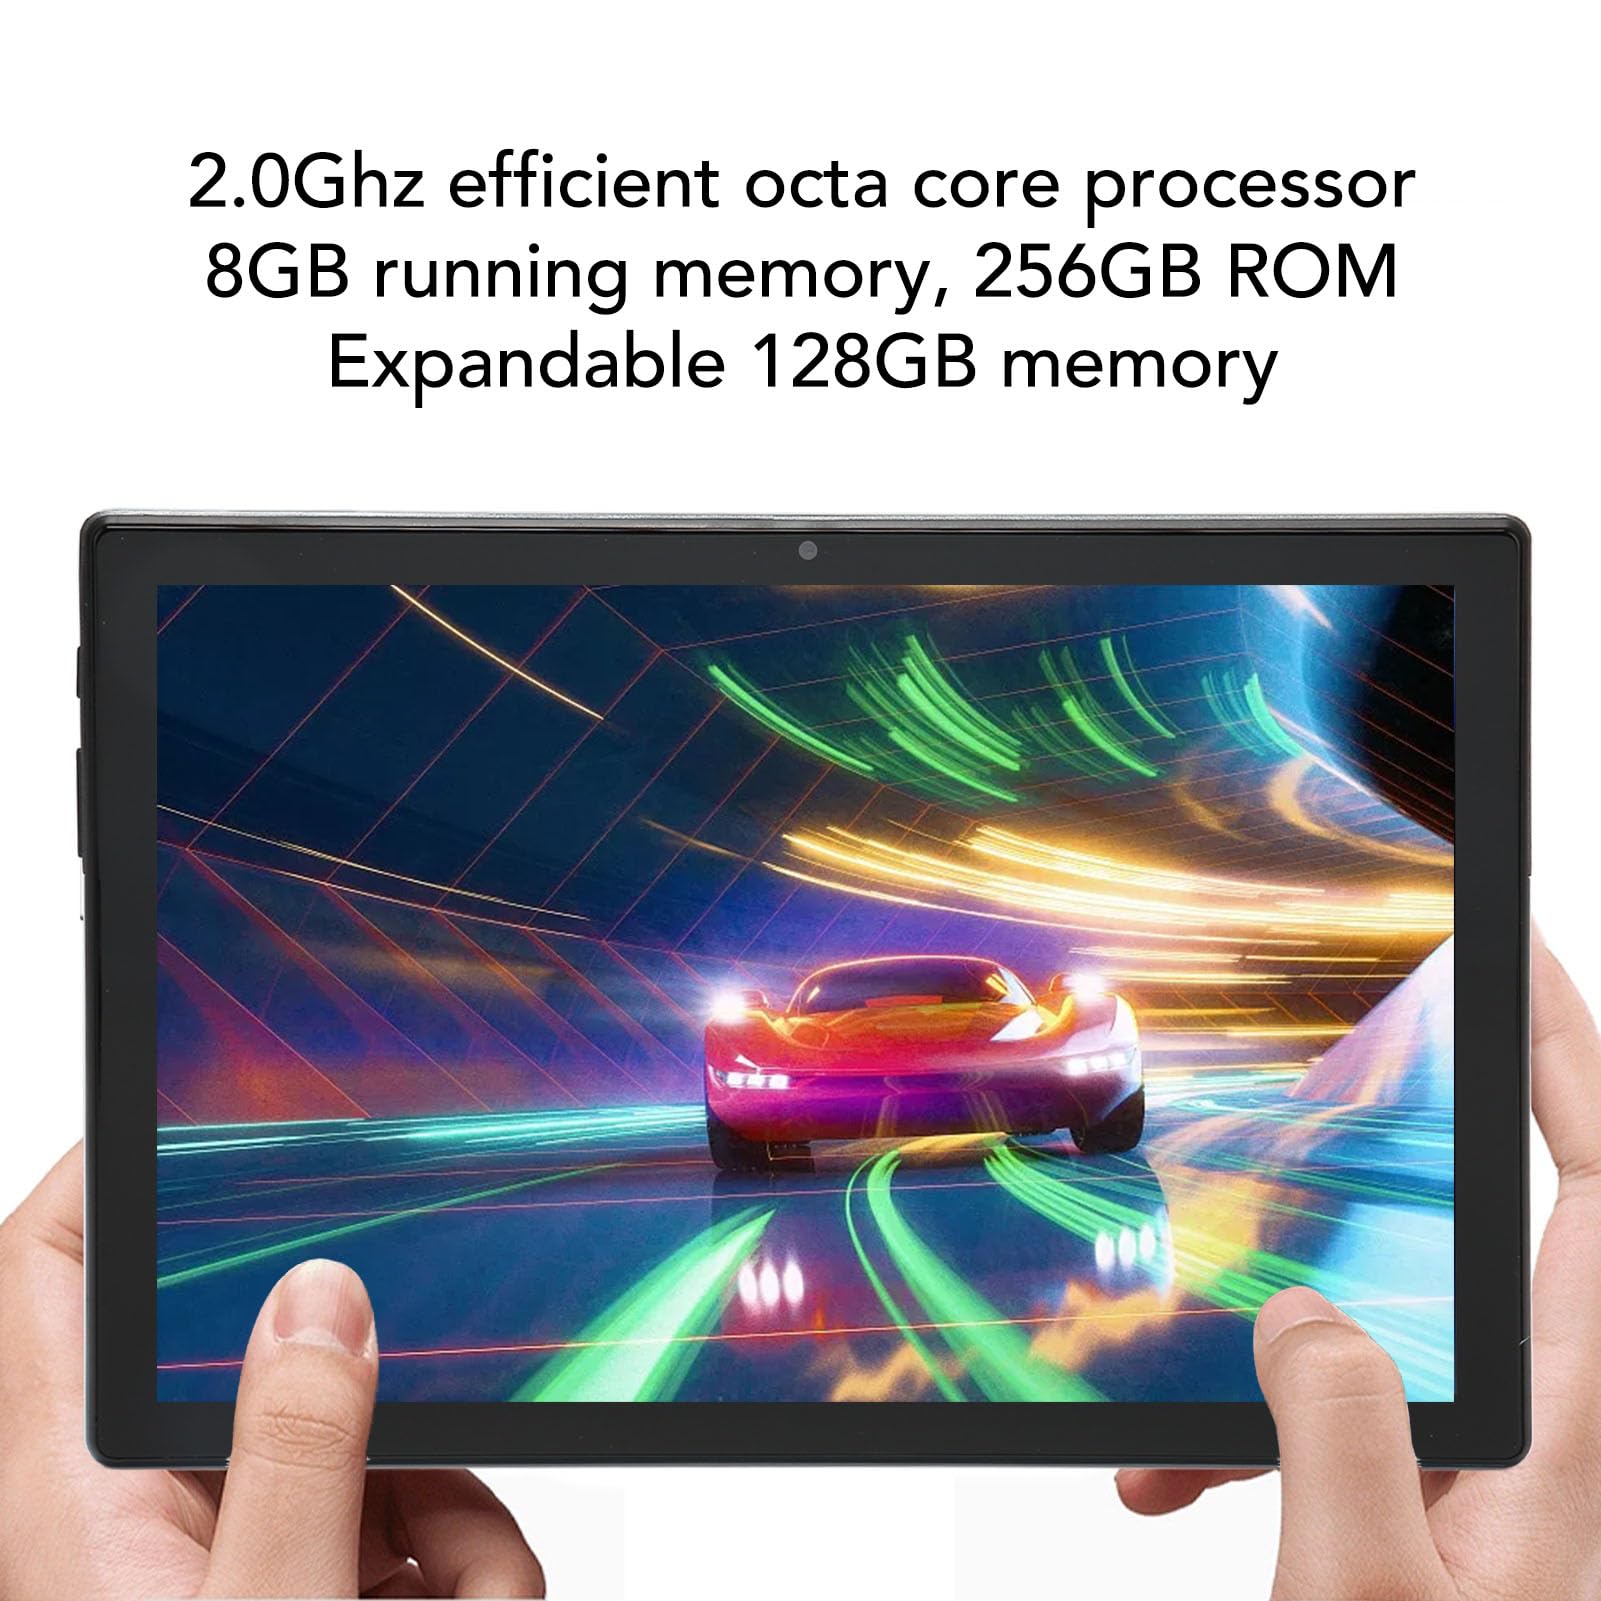 2 in 1 Tablet 10.1 Inch 12 8GB 256GB 16MP Camera Octa Core Processor WiFi GPS BT Tablet PC with Keyboard Blue (US Plug)